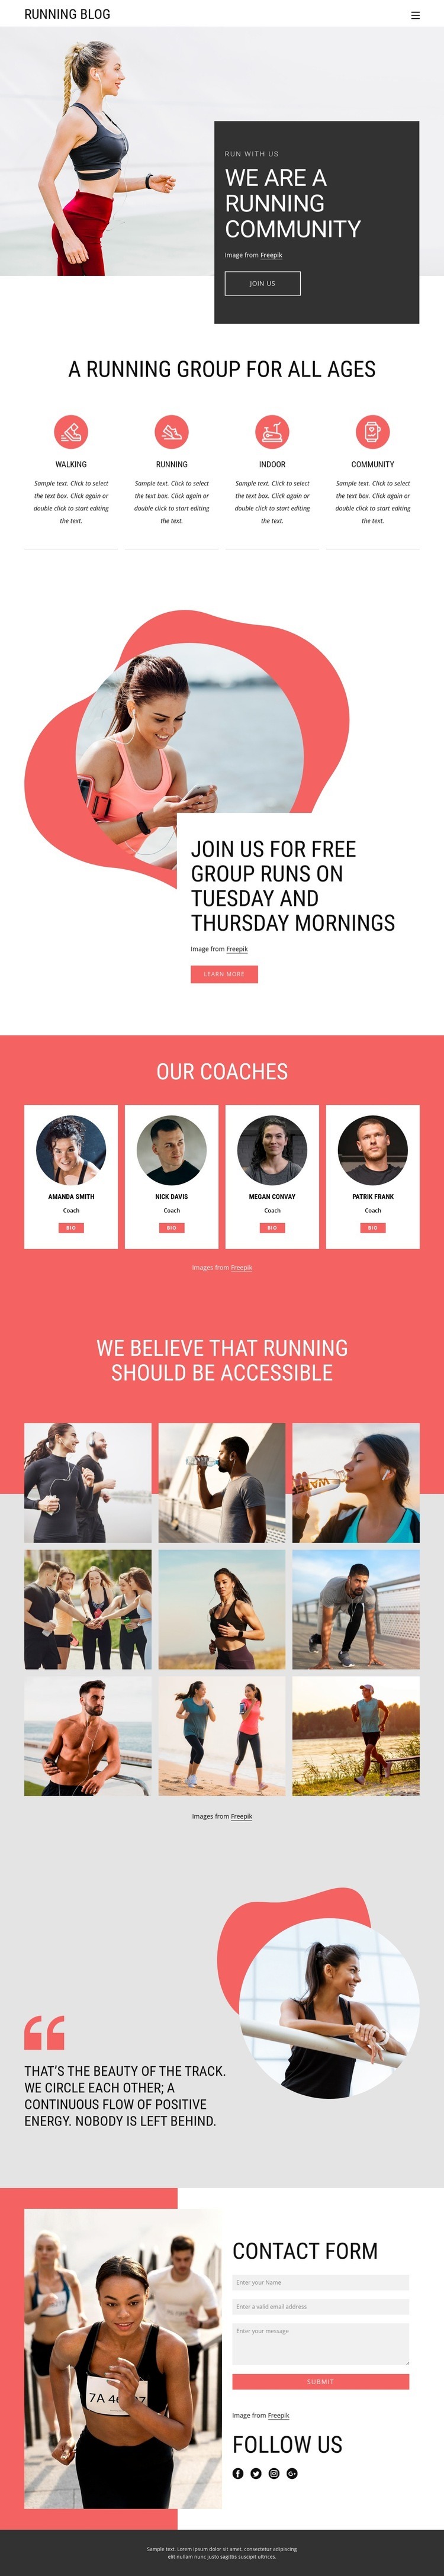 The Benefits of joining a run club Web Page Design